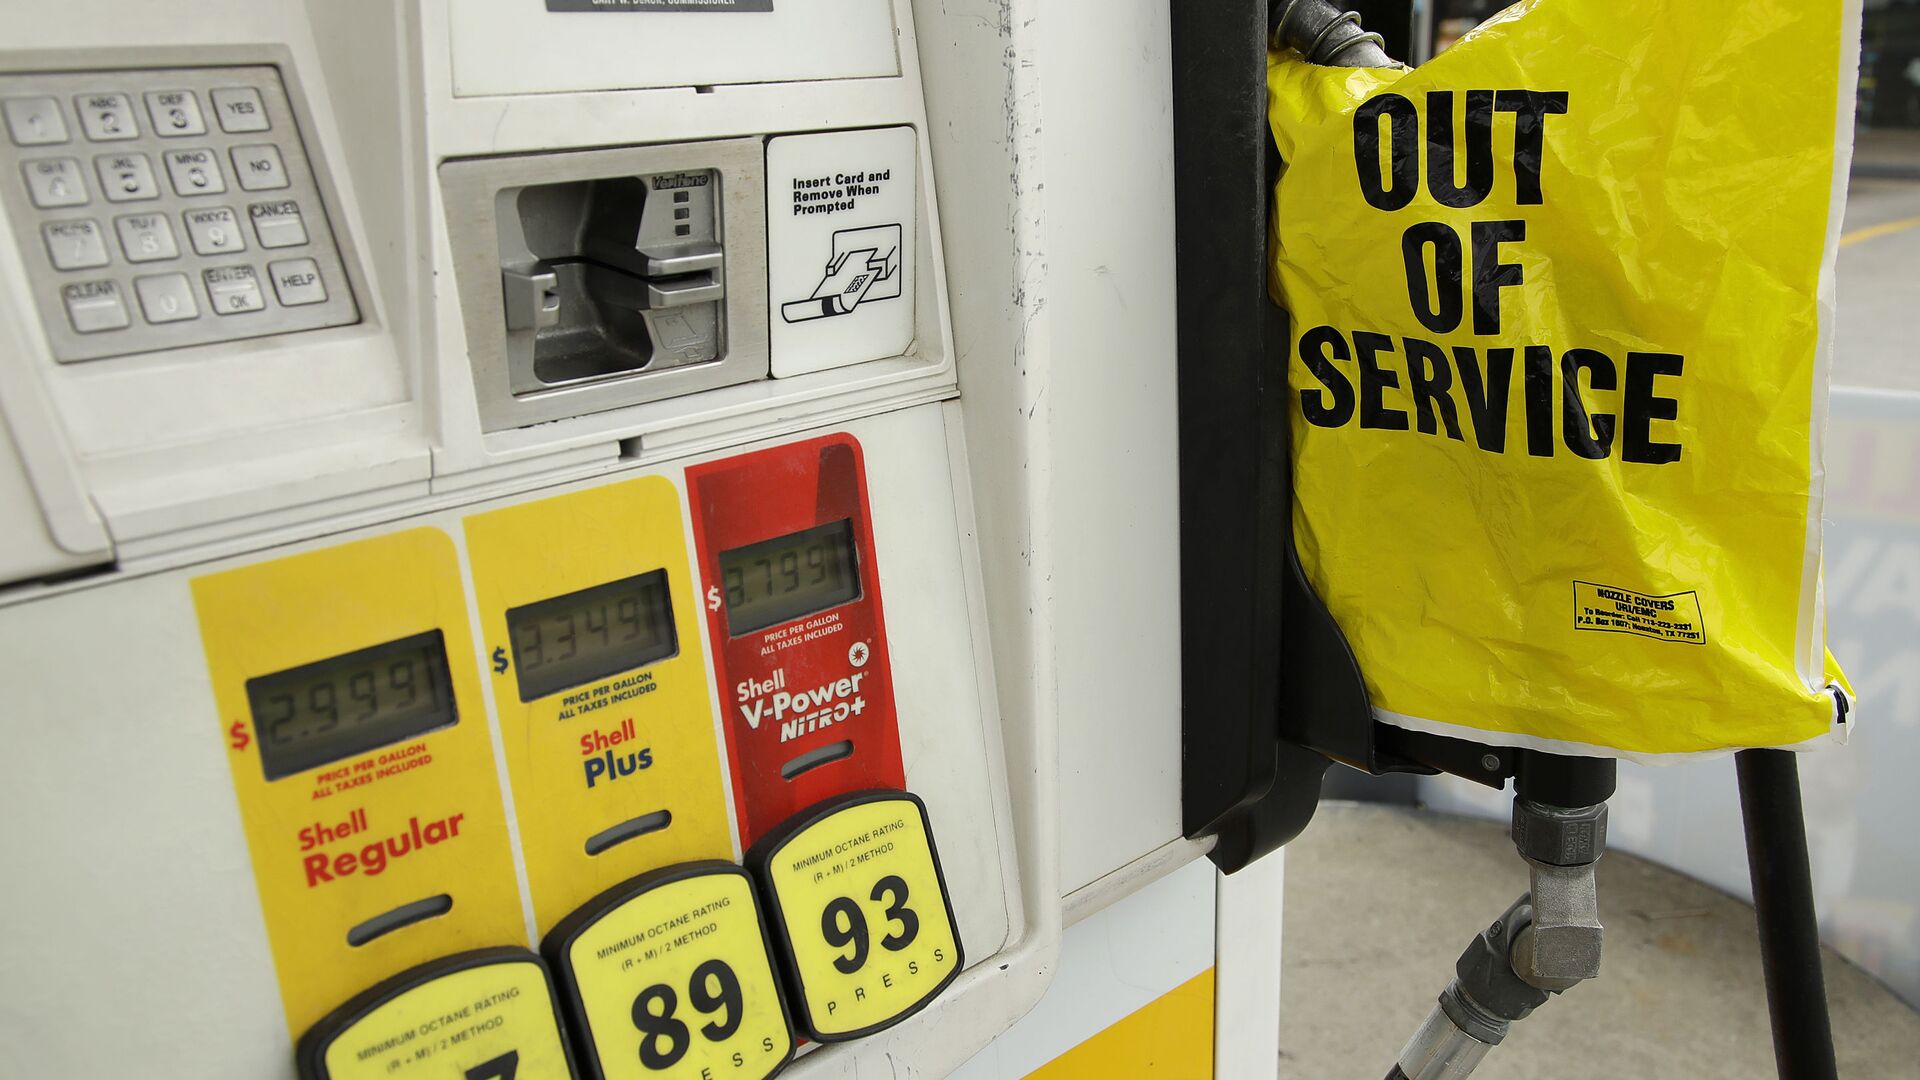 A gasoline station that ran out of gas for sale displays an out of service sign on the pump on Tuesday, May 11, 2021, in Atlanta. Gasoline futures are ticking higher following a cyberextortion attempt on the Colonial Pipeline, a vital U.S. pipeline that carries fuel from the Gulf Coast to the Northeast. - Sputnik International, 1920, 08.09.2021